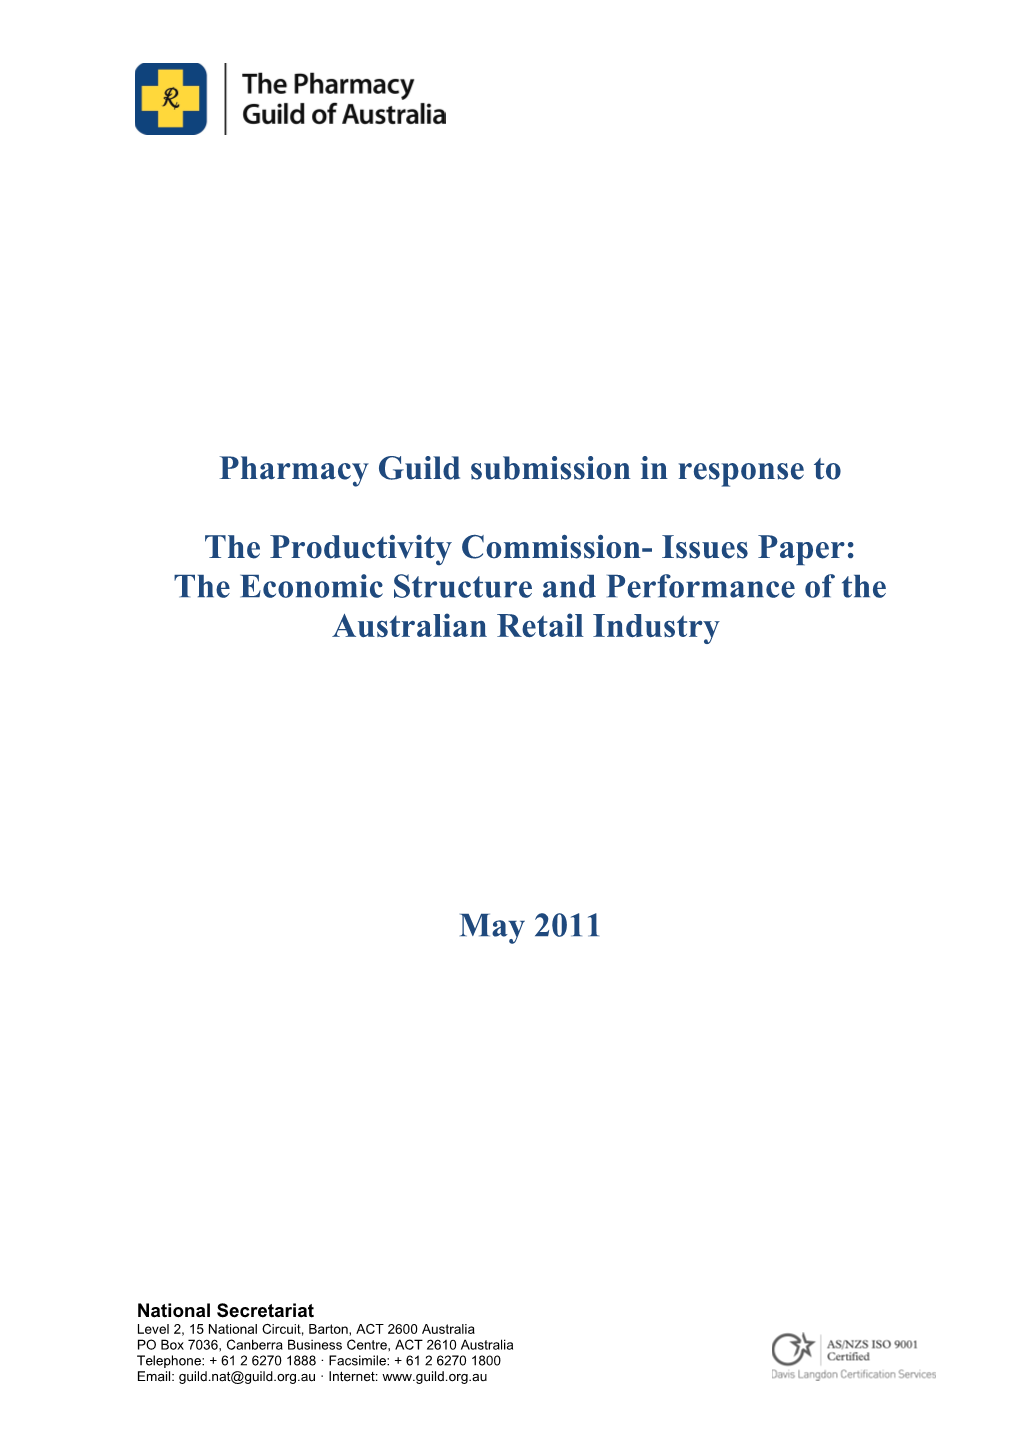 Submission 72 - the Pharmacy Guild of Australia - Economic Structure and Performance Of